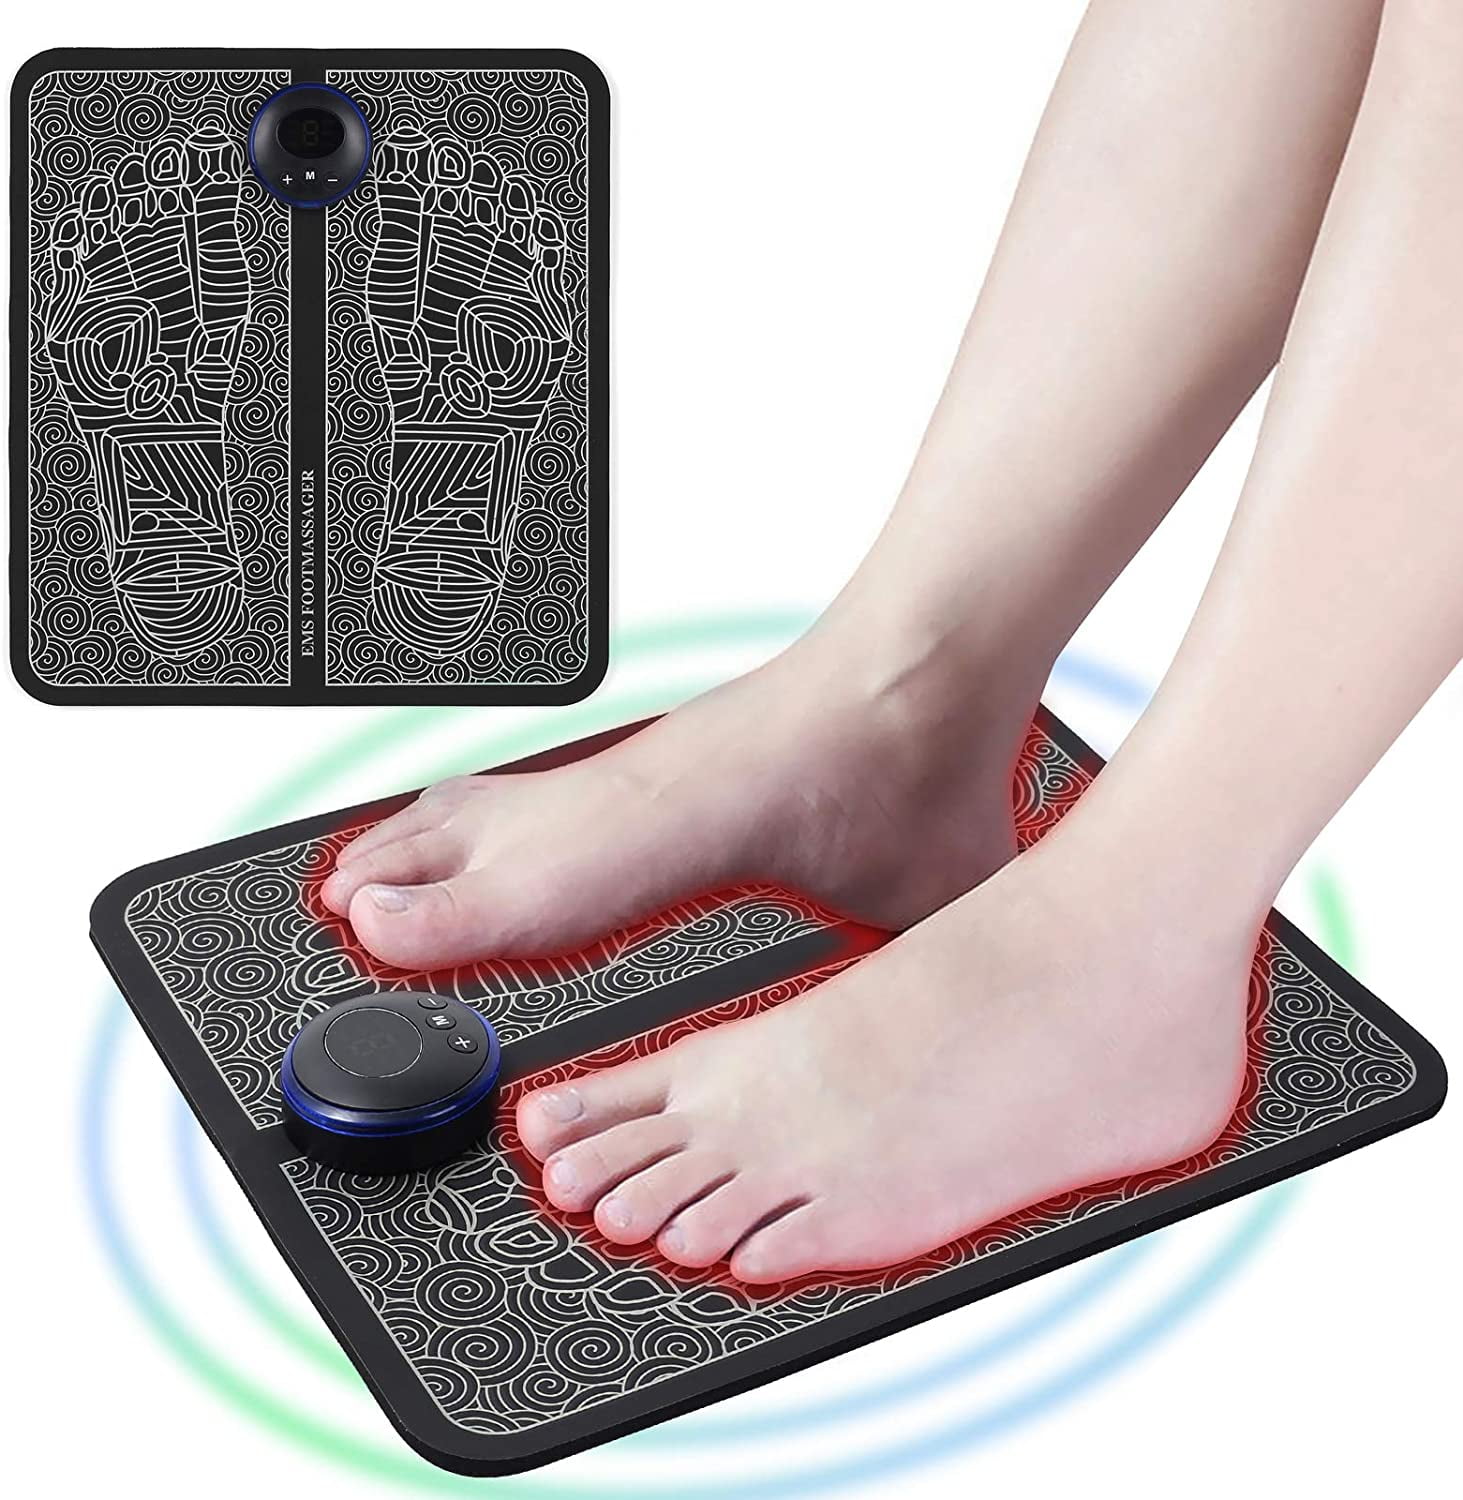 EMS Leg Reshaping Foot Massager, Portable USB Rechargeable Massage Foot ...